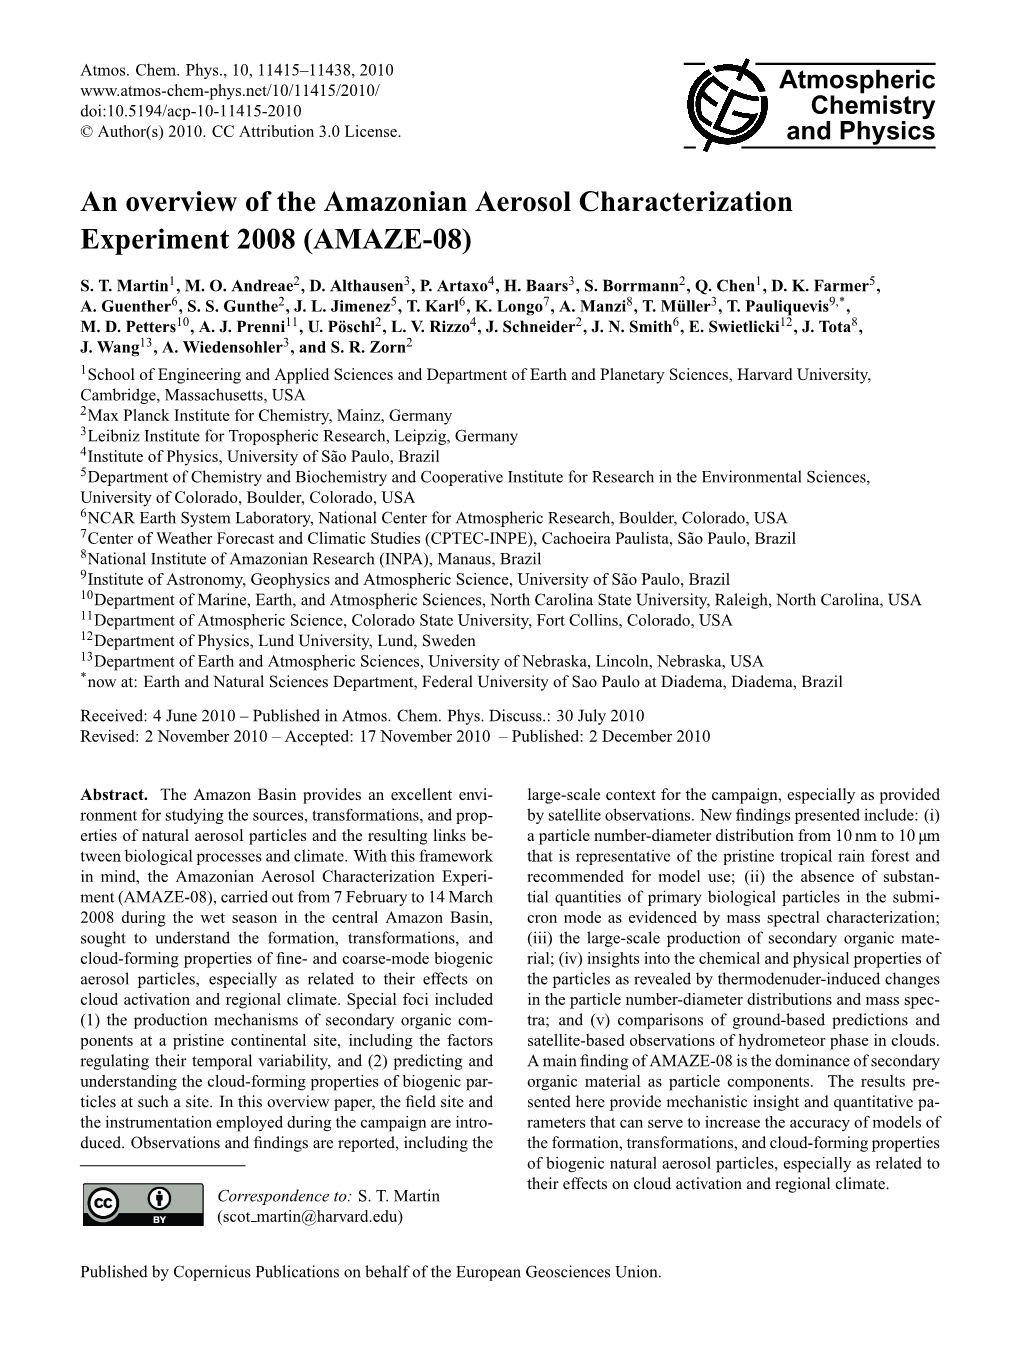 An Overview of the Amazonian Aerosol Characterization Experiment 2008 (AMAZE-08)